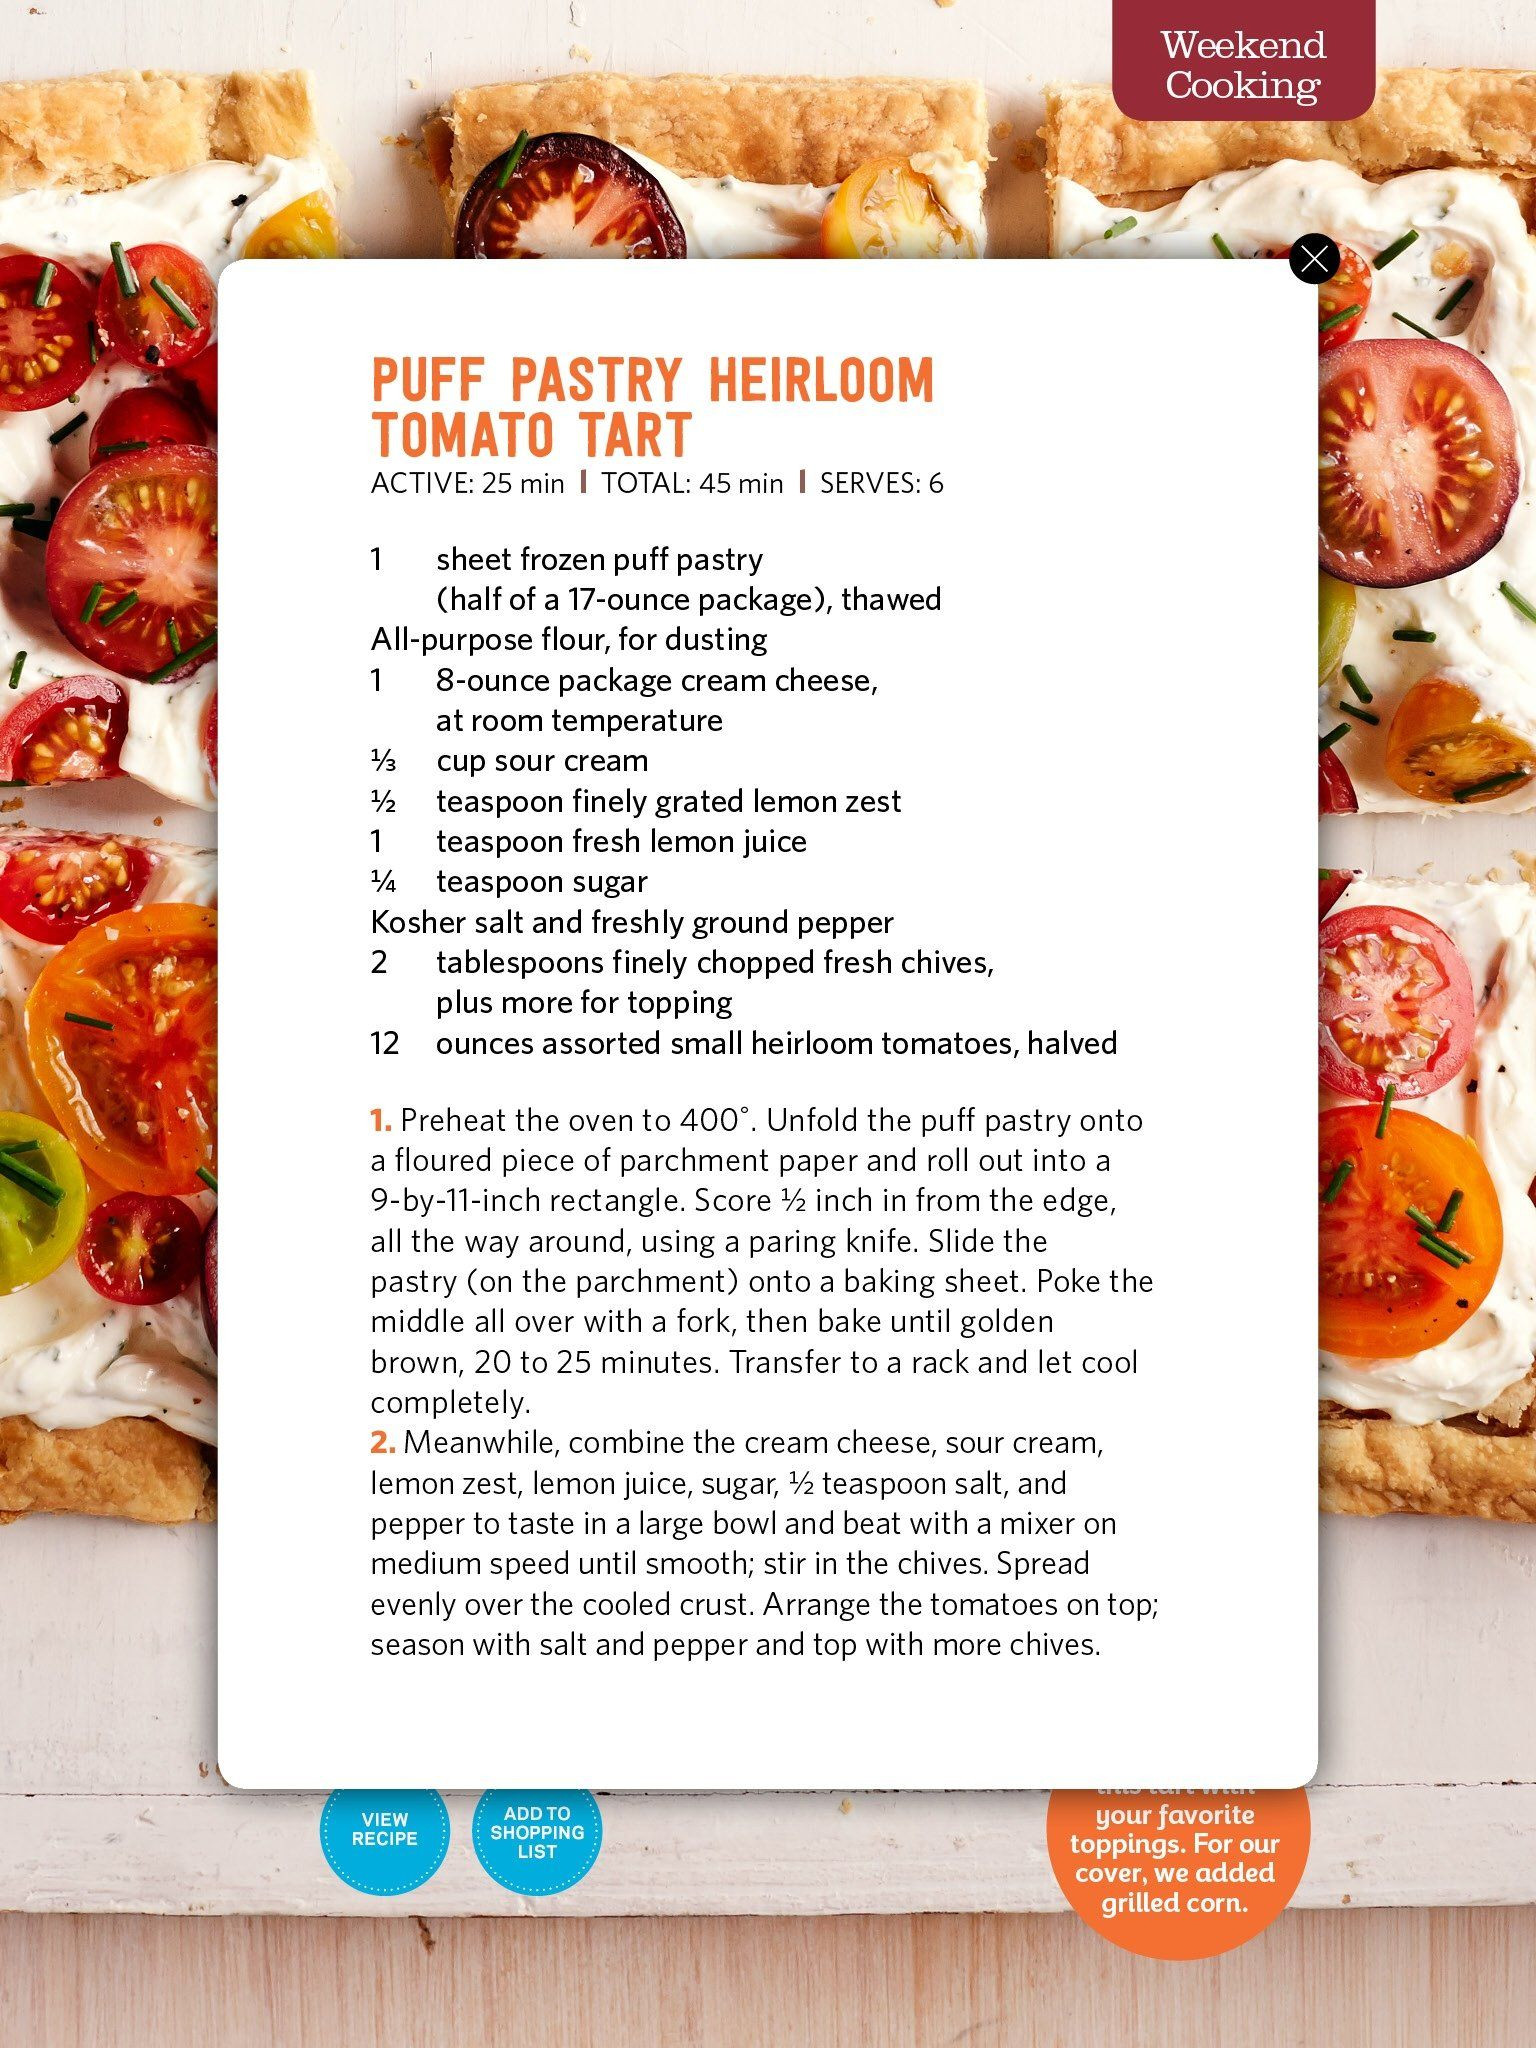 Gluten Free Appetizers Food Network
 Puff Pastry Heirloom Tomato Tart from Food Network